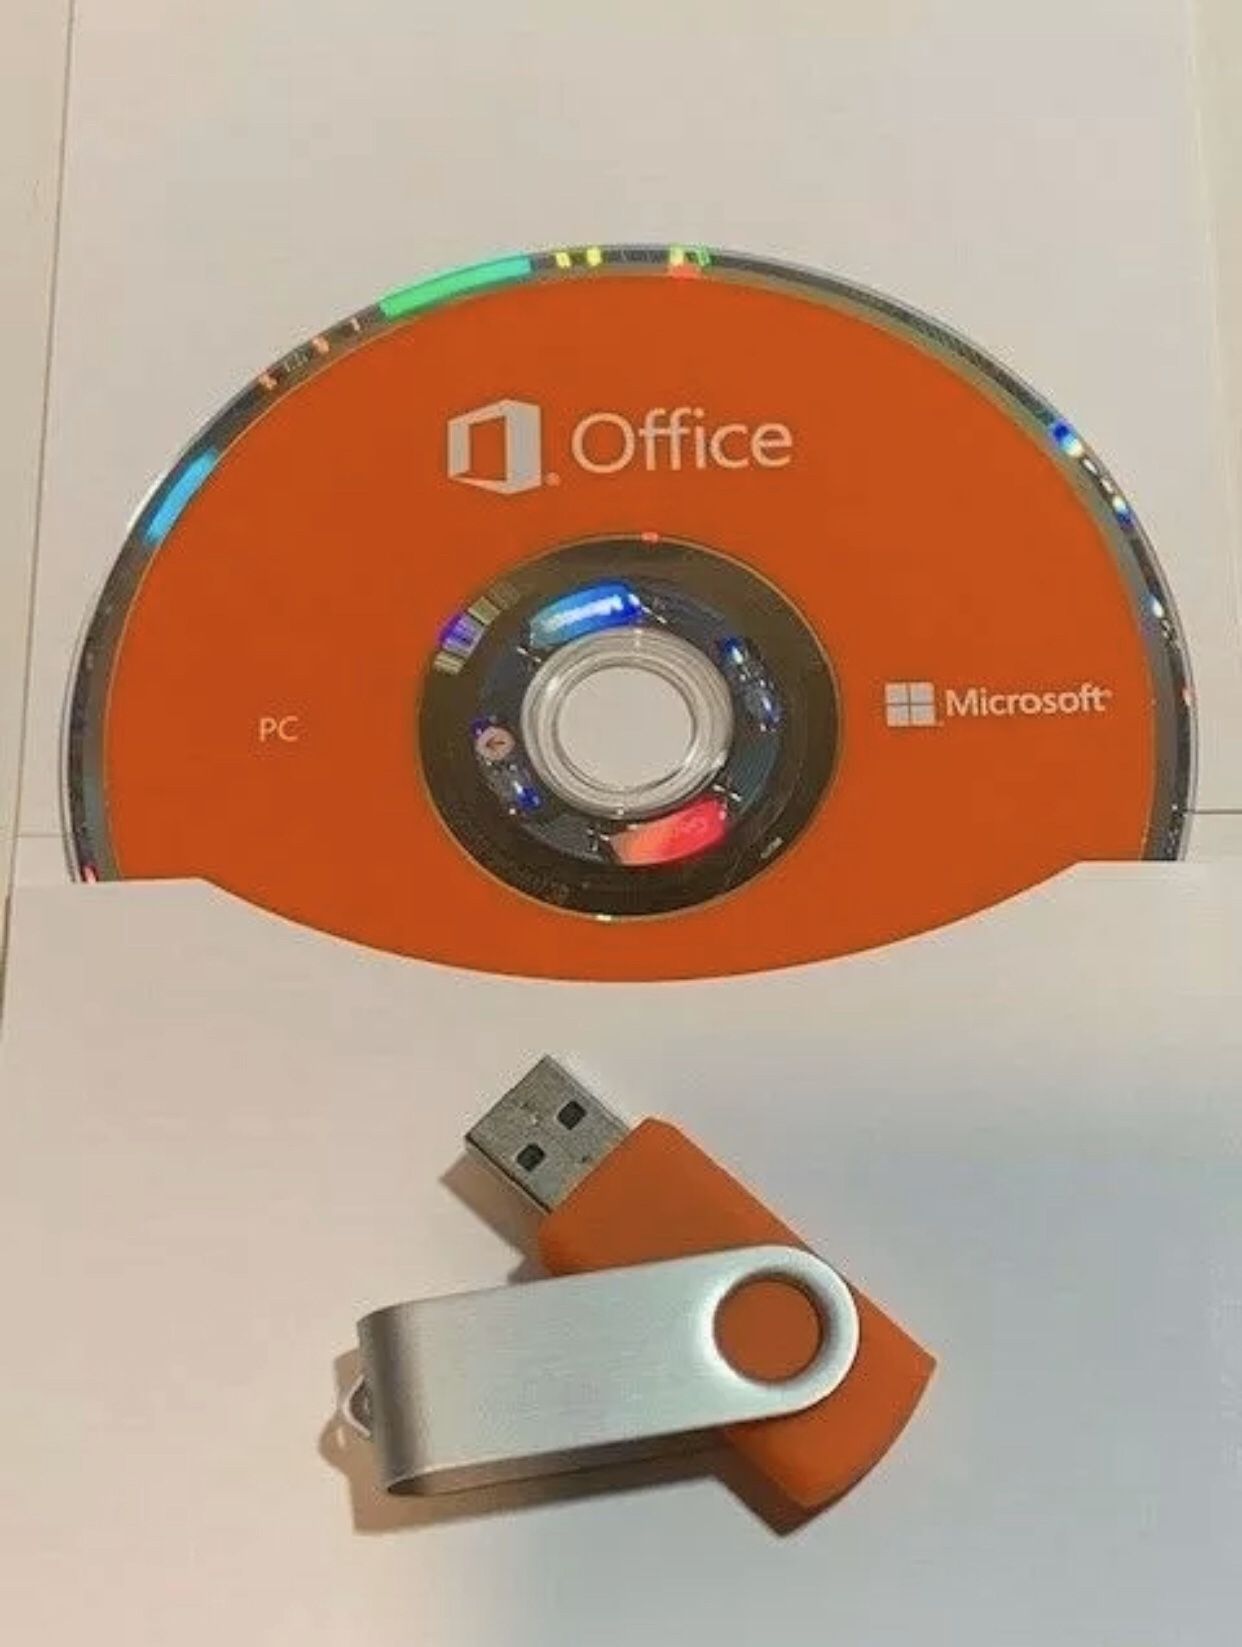 Microsoft Office 2019 for laptop and desktop computer surface go pro Lenovo HP Sony Samsung gaming computers and more